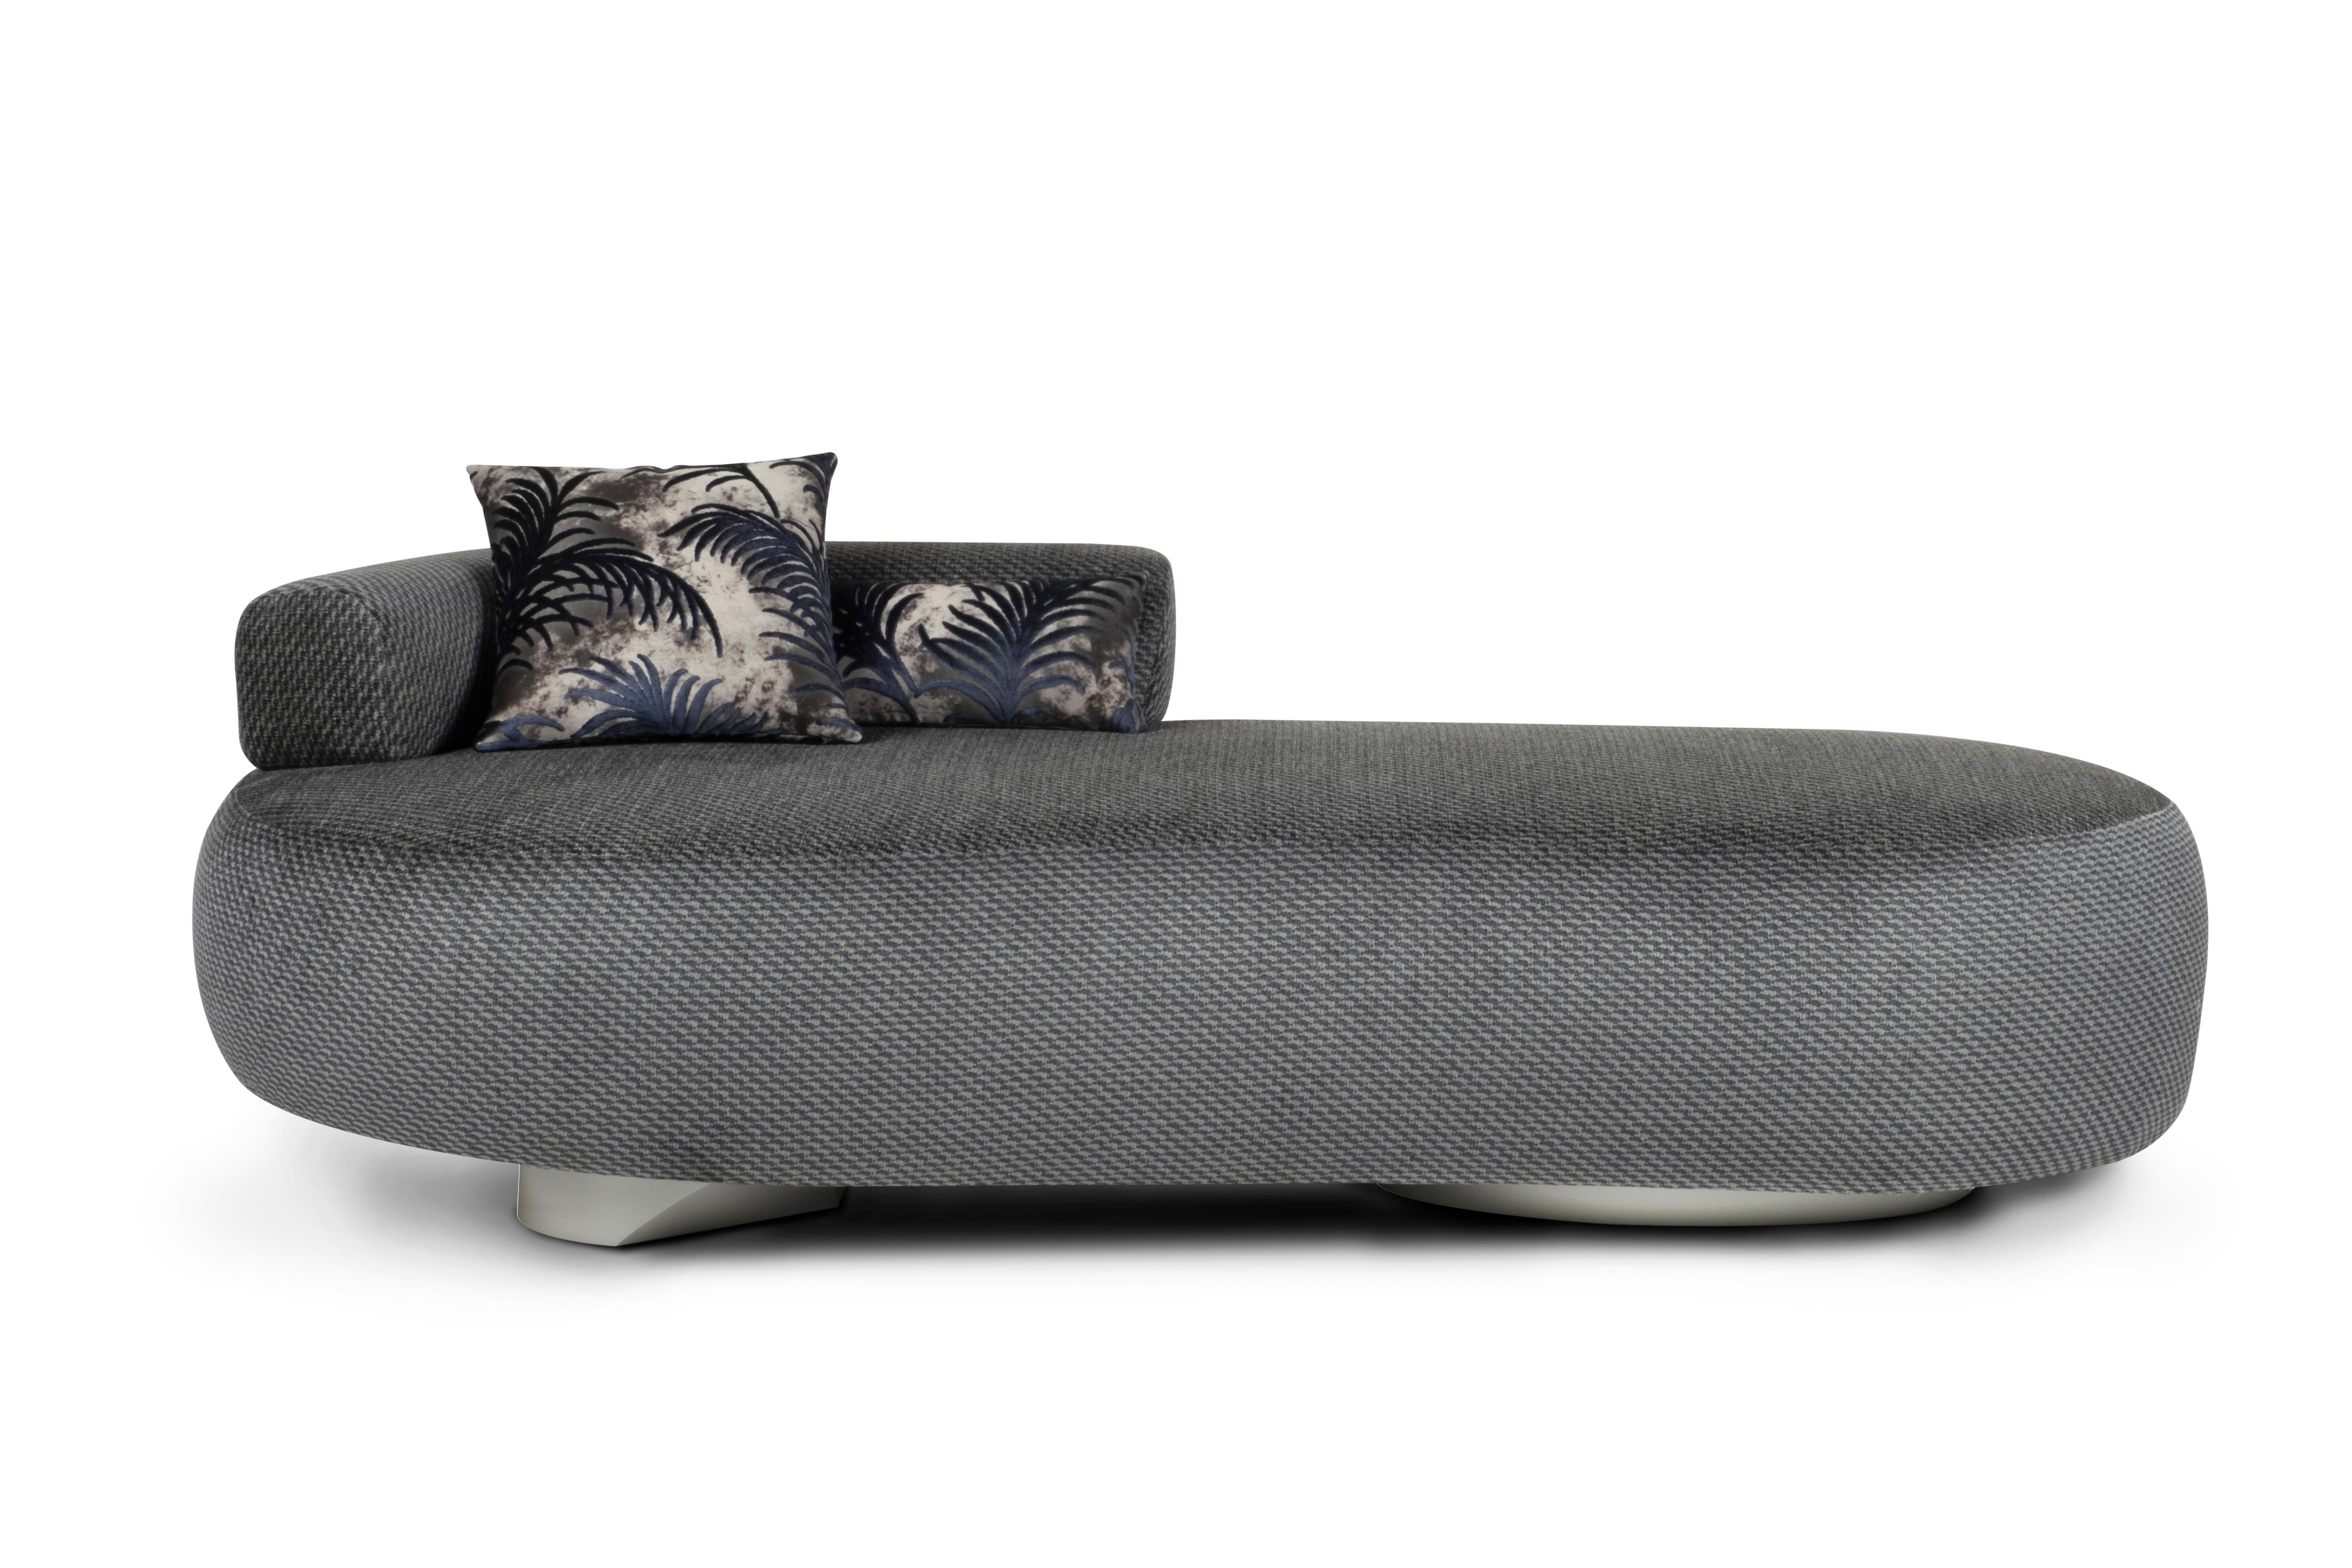 Portuguese Modern Twins Chaise Lounge, Grey Linen, Handmade in Portugal by Greenapple For Sale